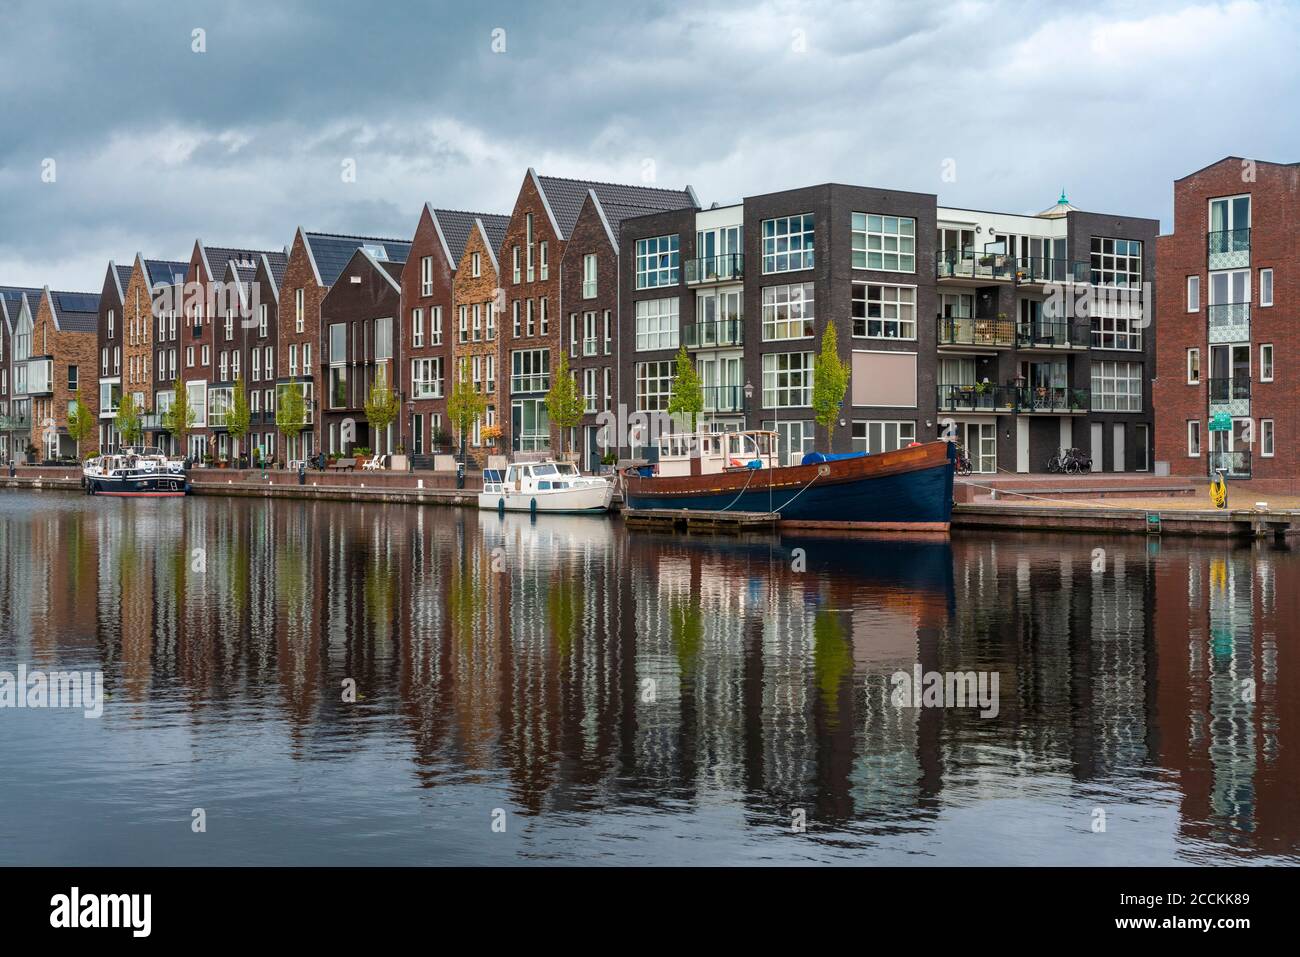 Netherlands, North Holland, Haarlem, Houses along Spaarne river canal Stock Photo